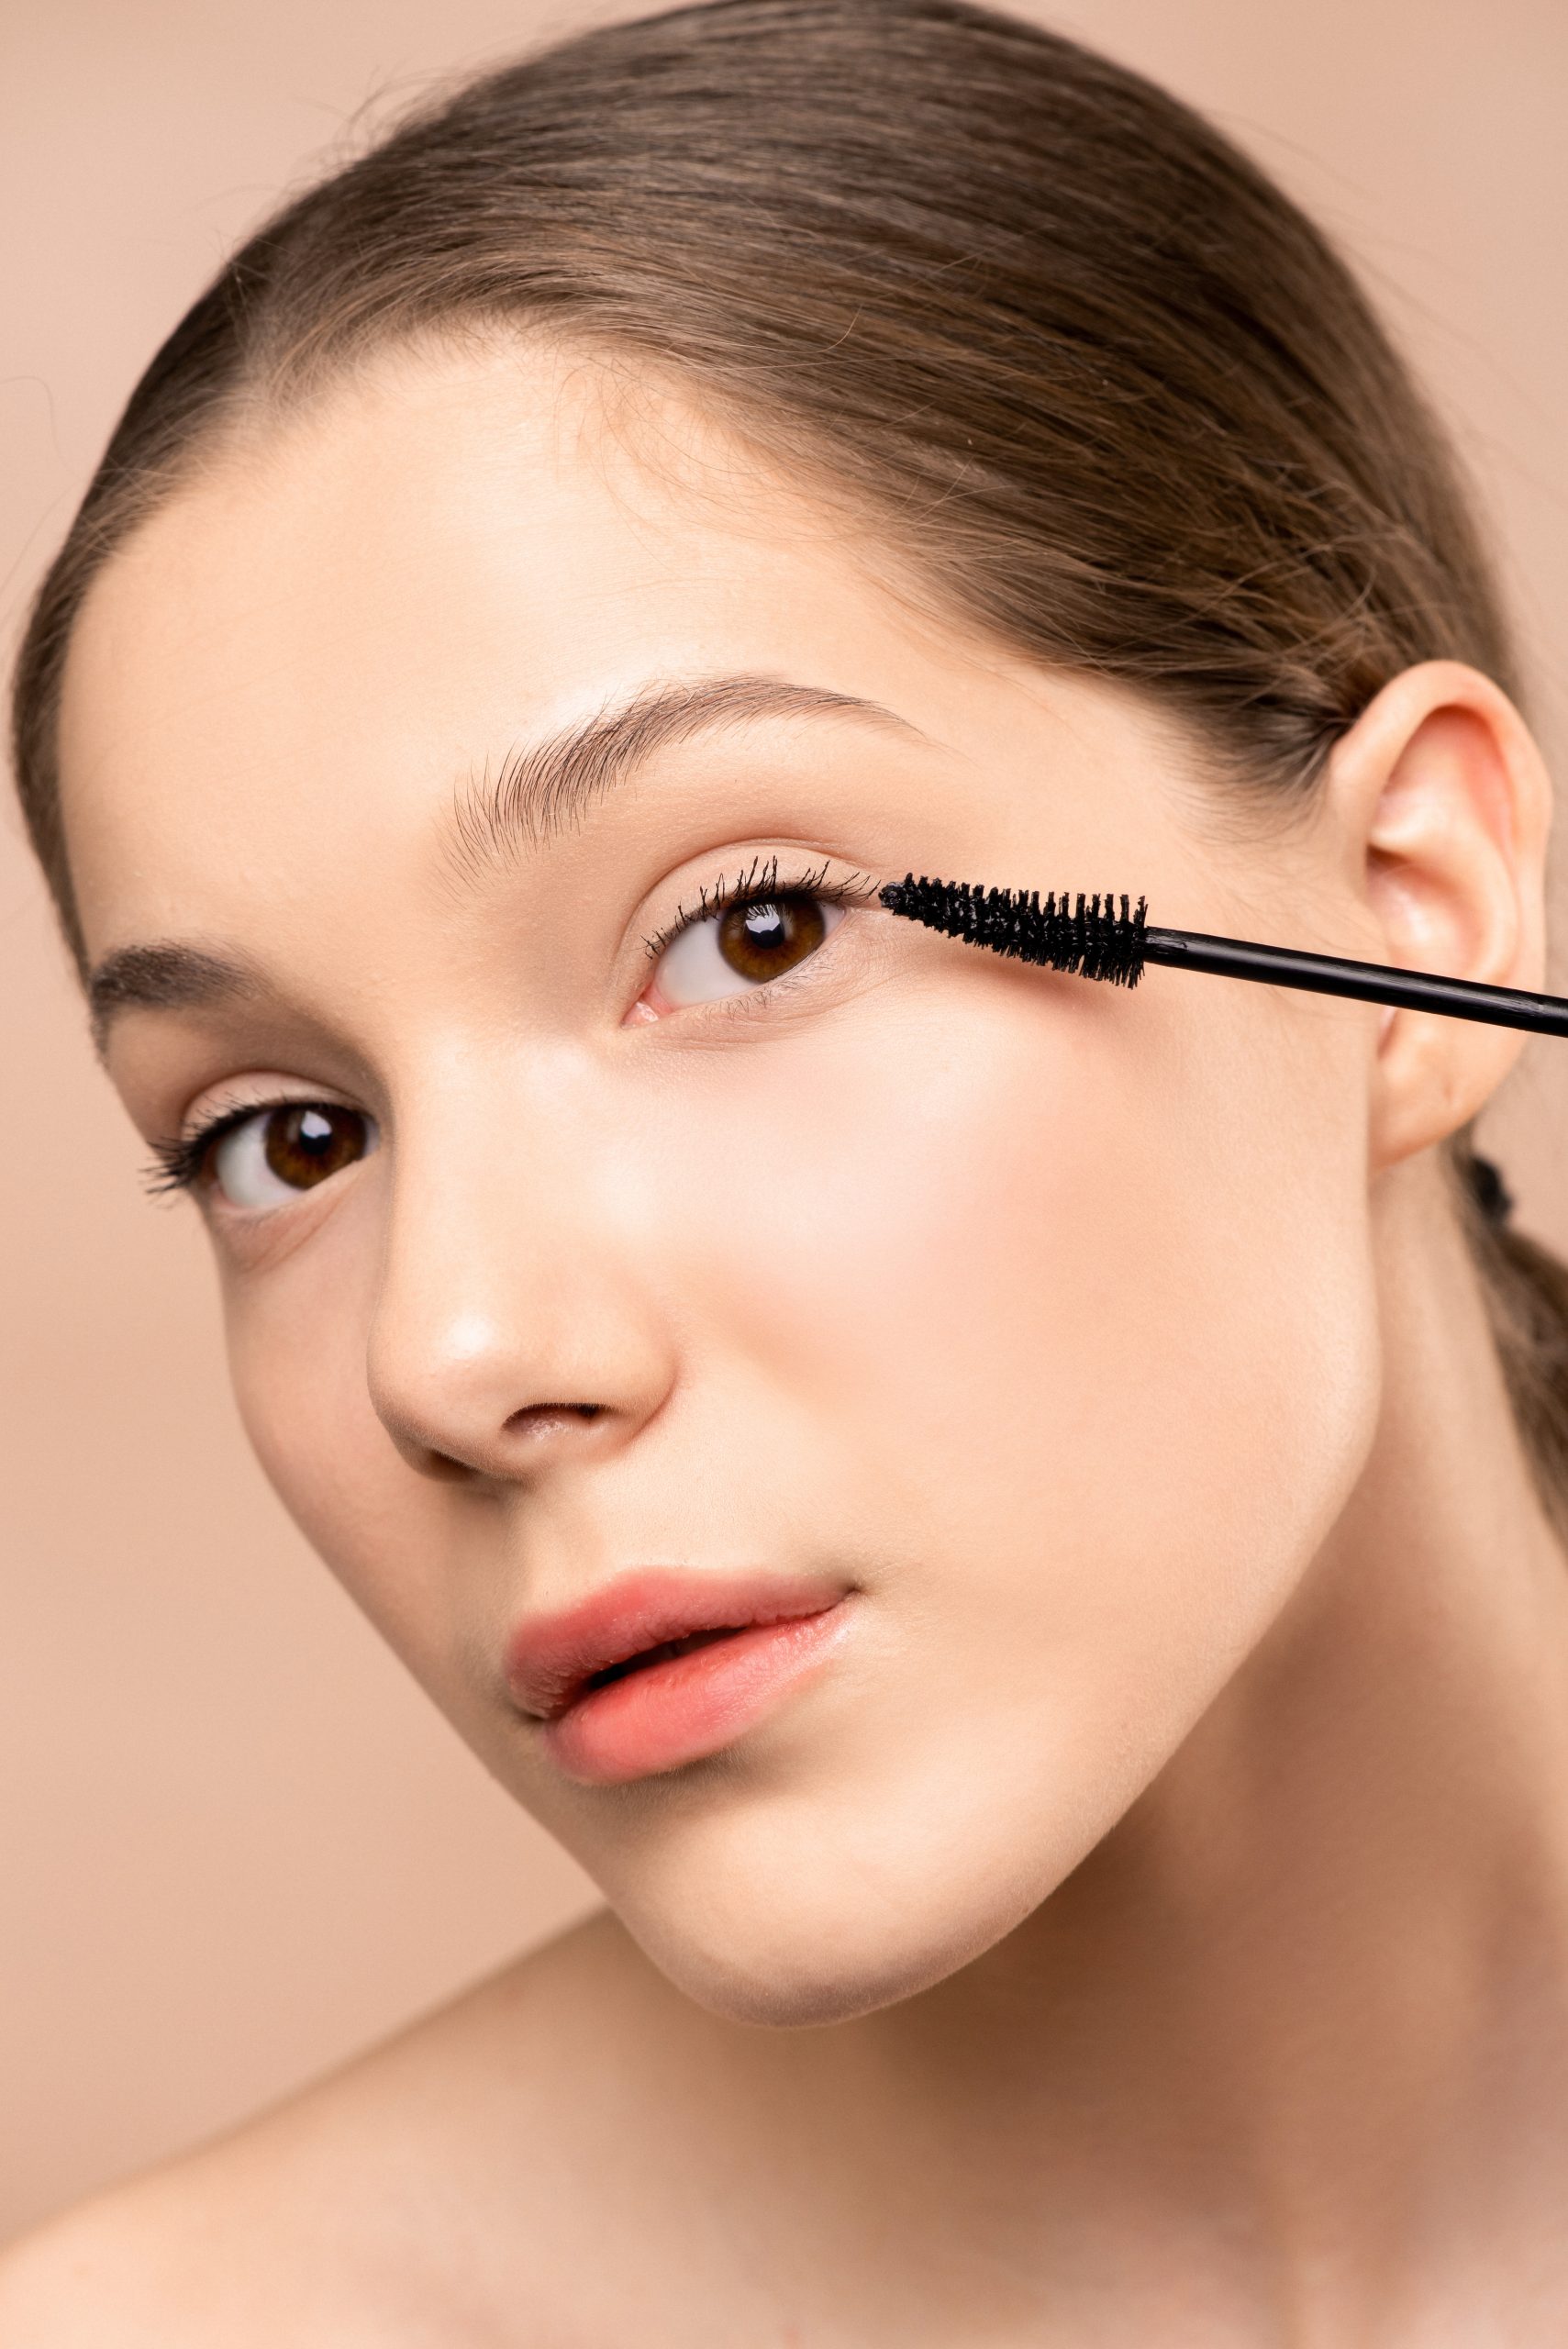 How Is A Brow lift Done? 